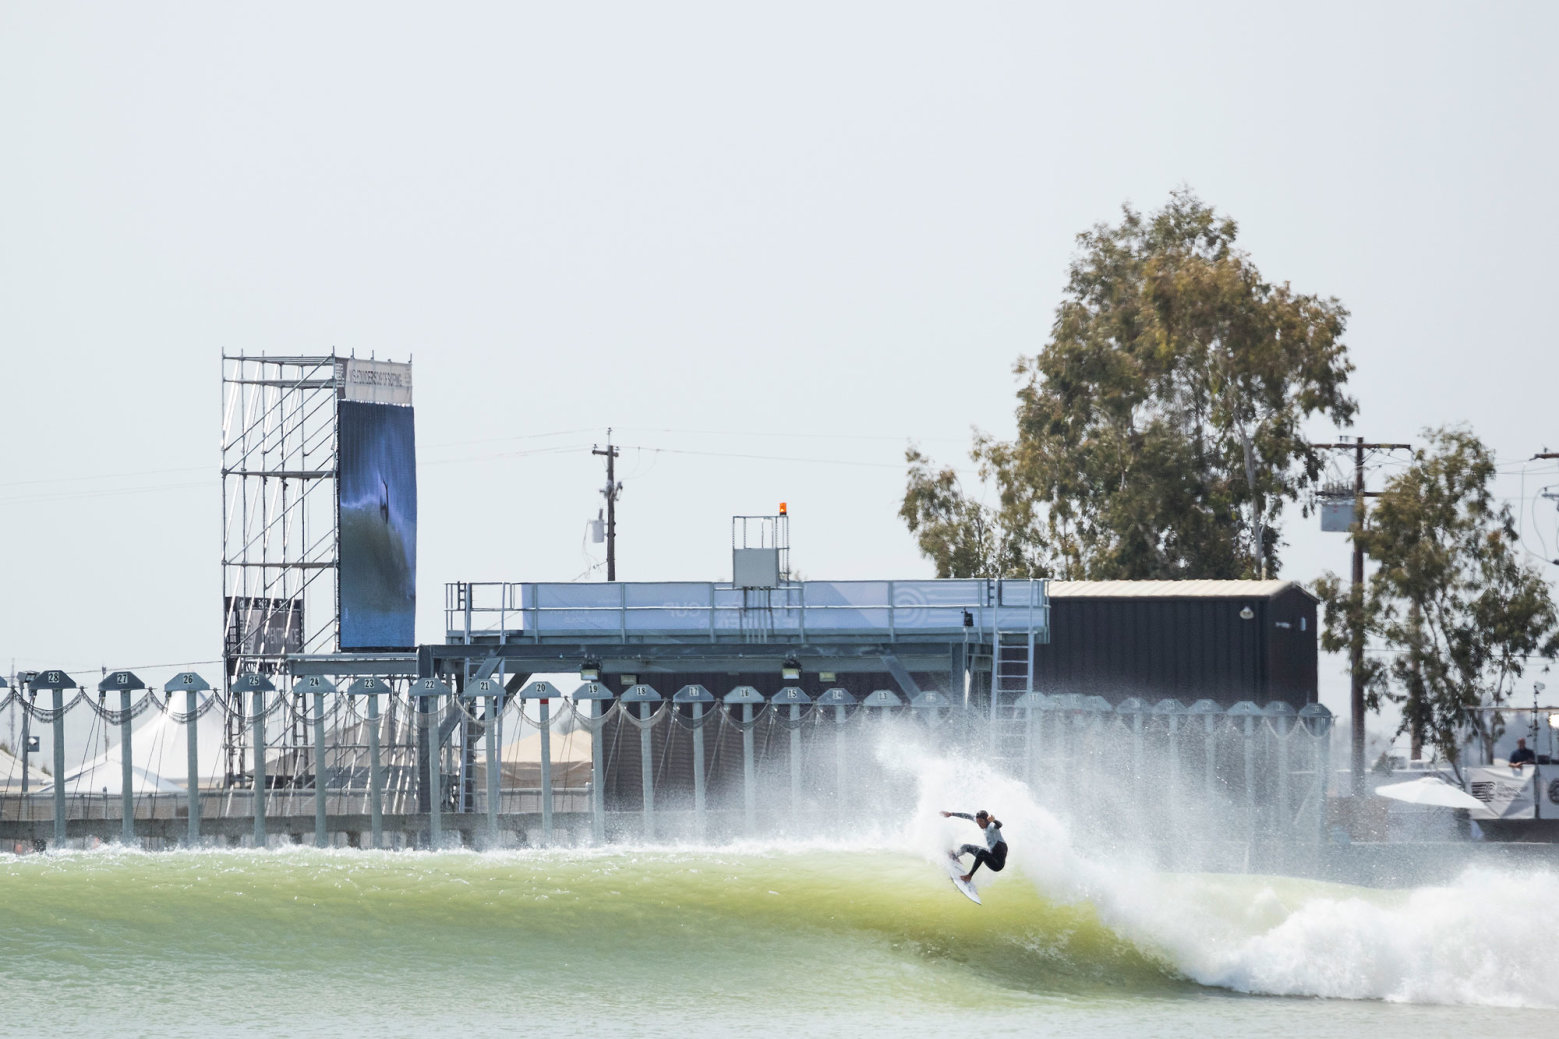 Previewing The Surf Ranch Pro Like No 'CT Event, Ever